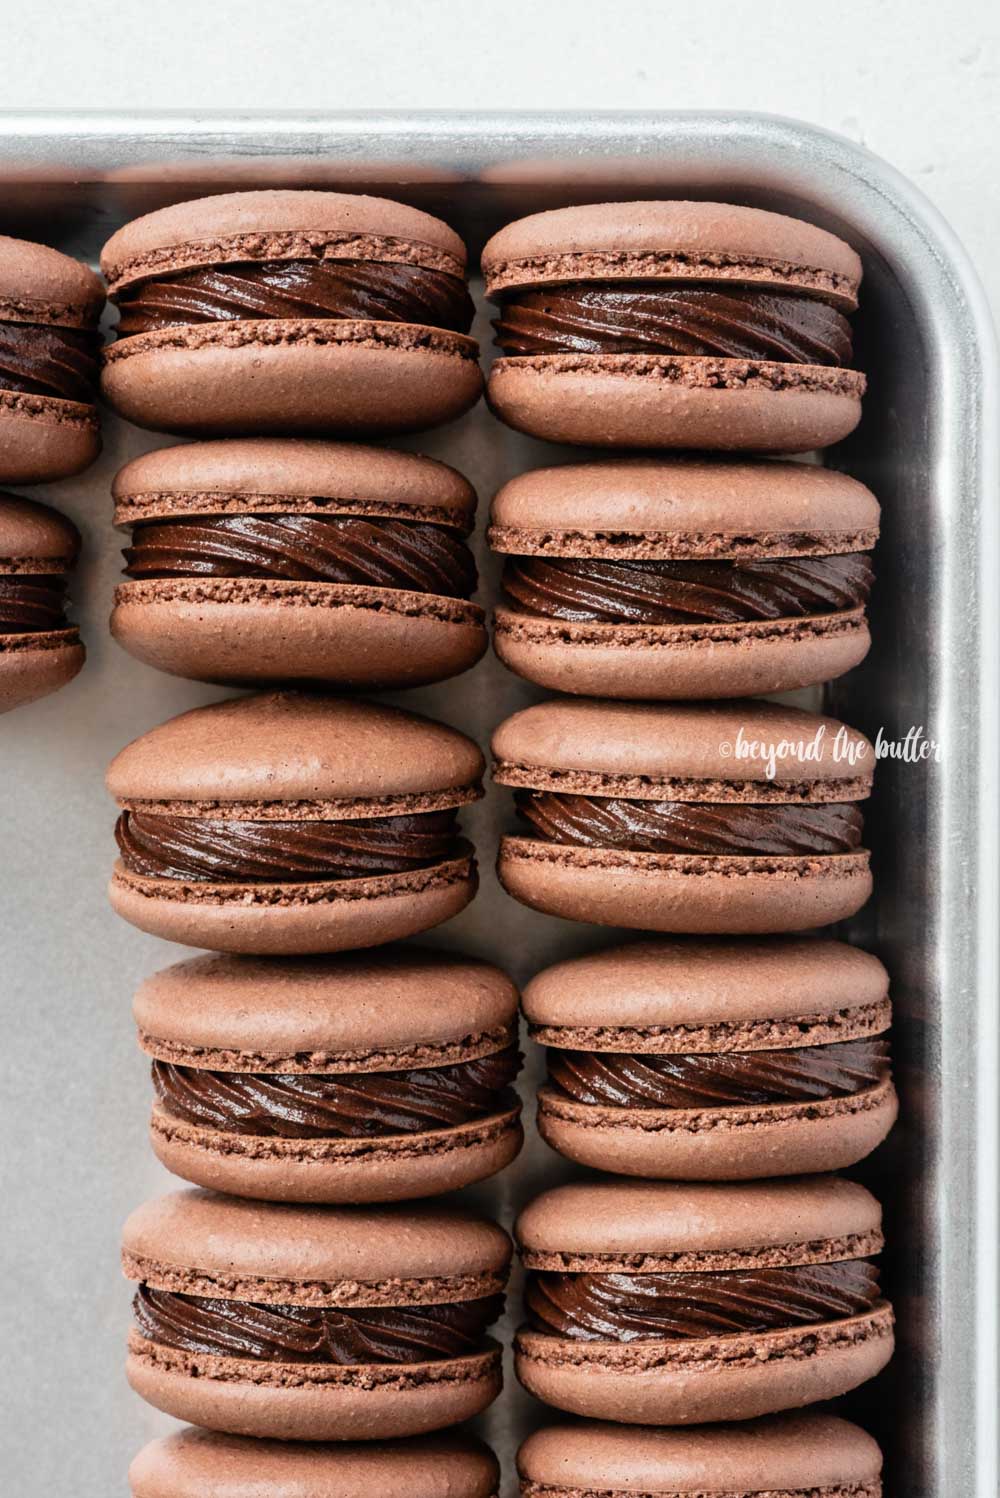 Small baking tray lined with dark chocolate macarons | All Images © Beyond the Butter™